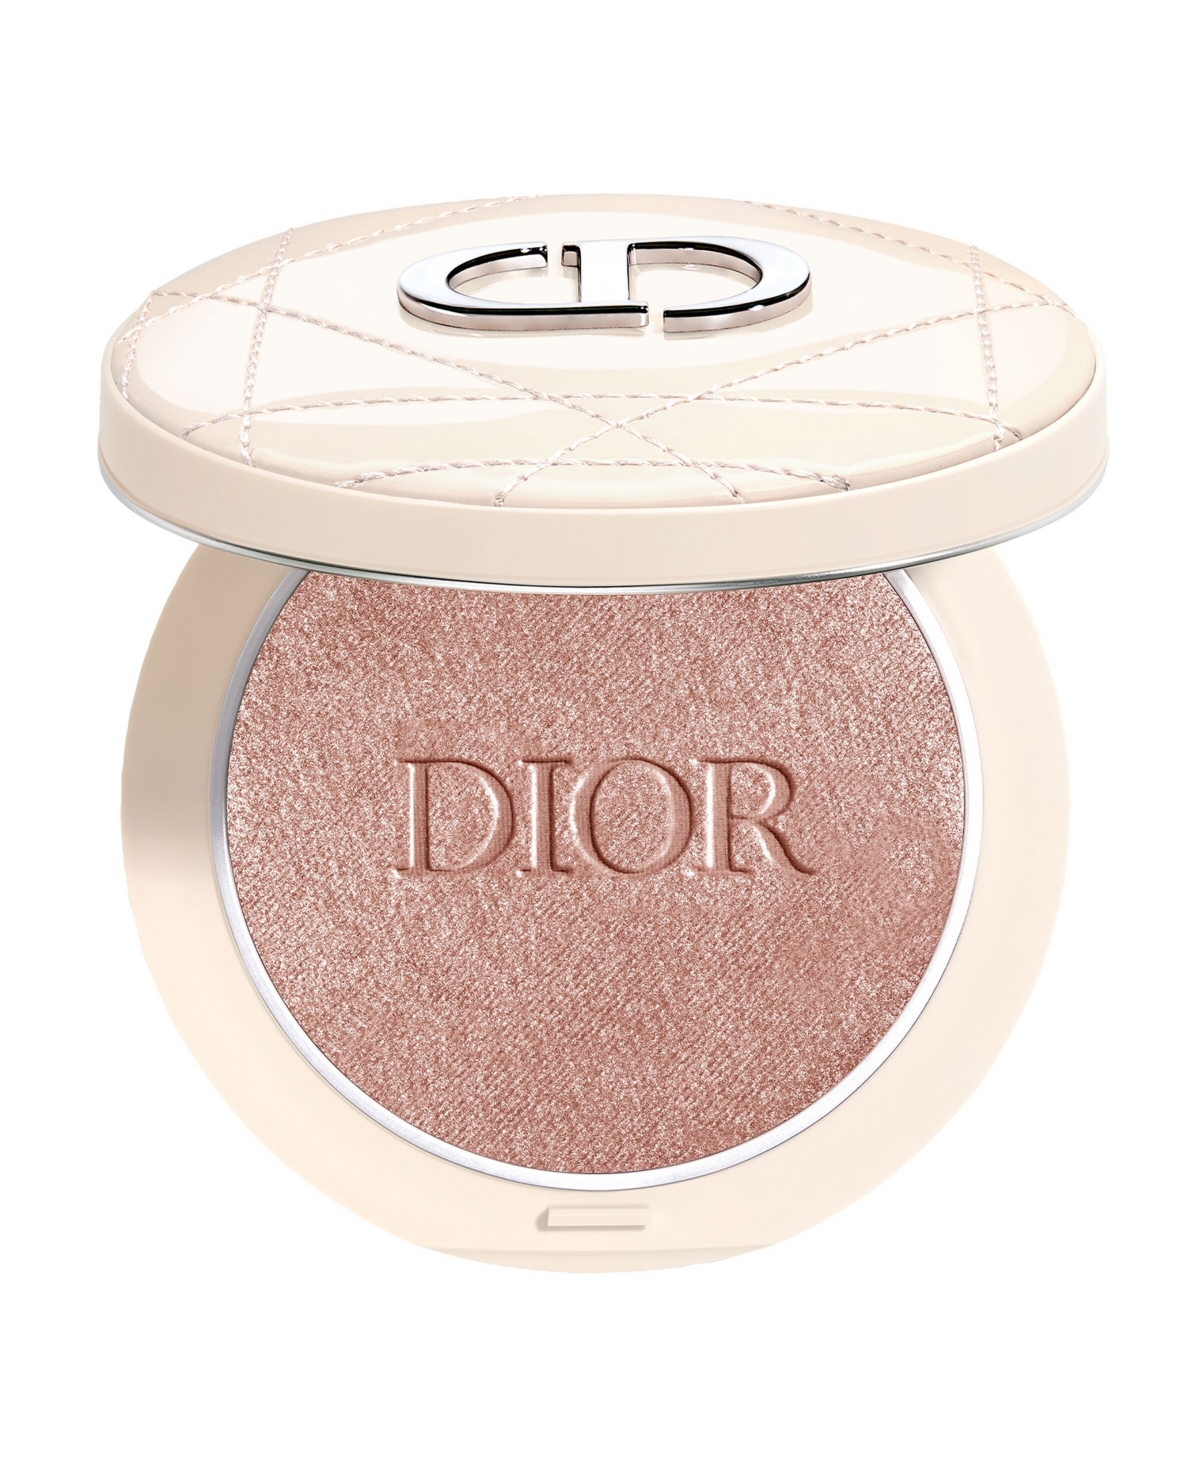 Dior Forever Couture Luminizer Highlighter Powder In Rosewood Glow